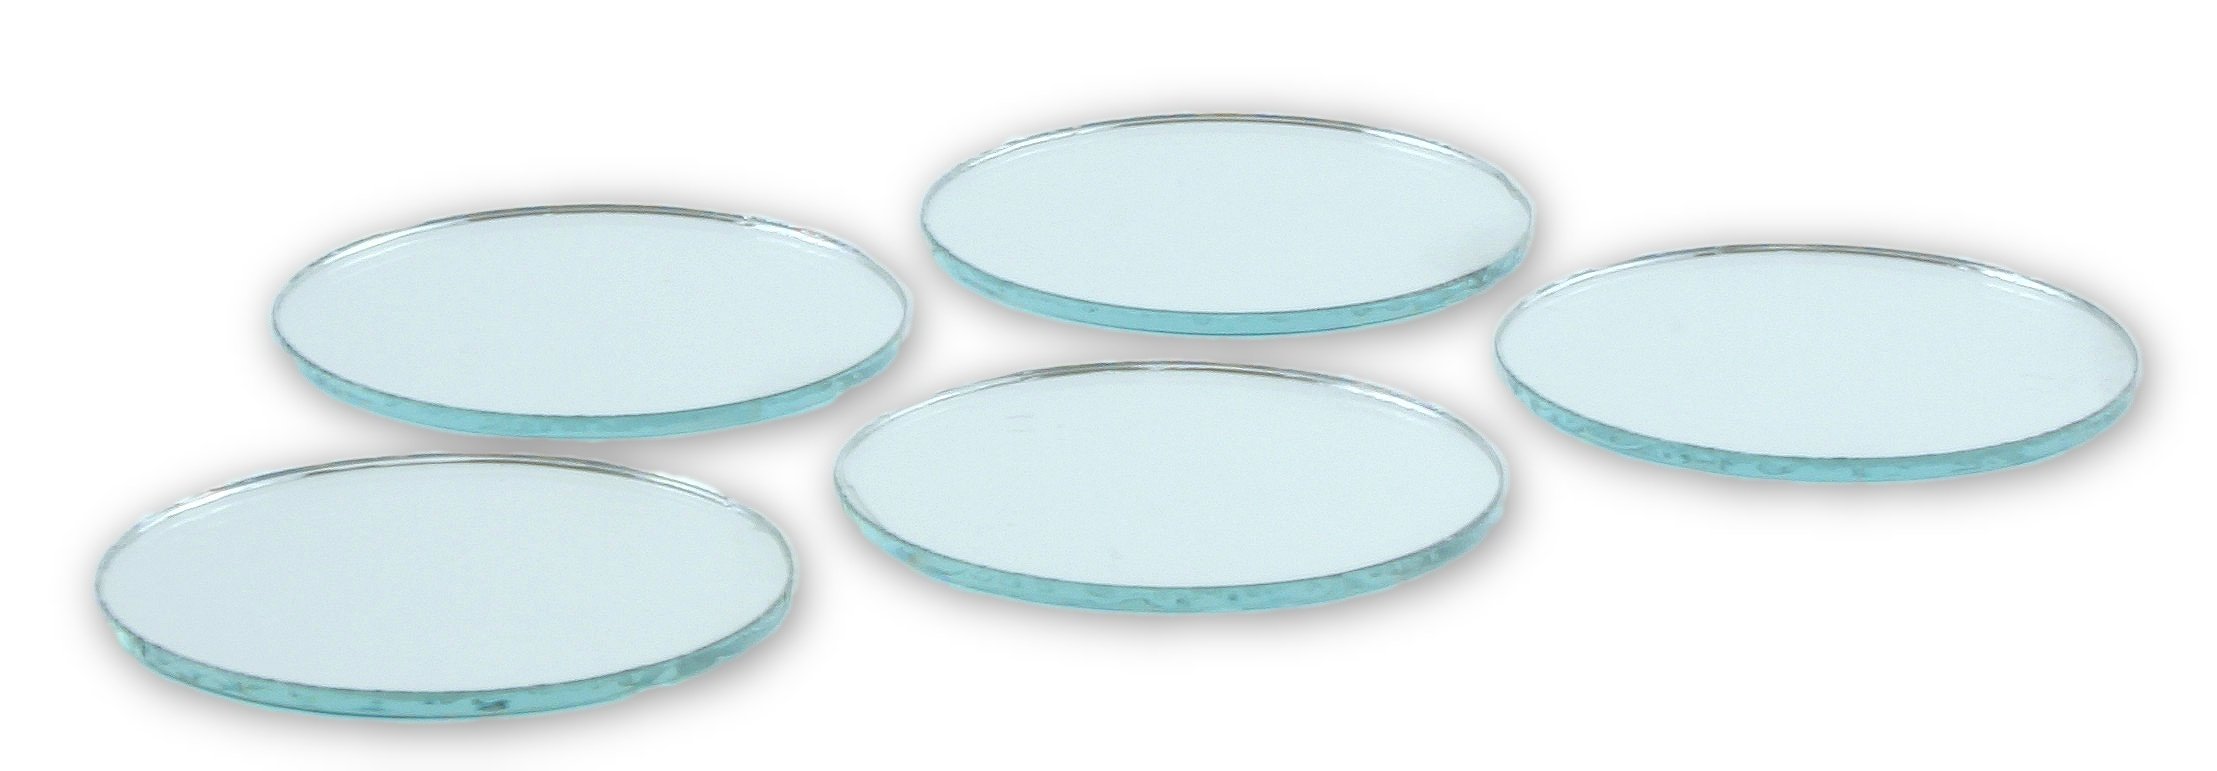  60-Pack Small Round Mirrors For Crafts, 2-Inch